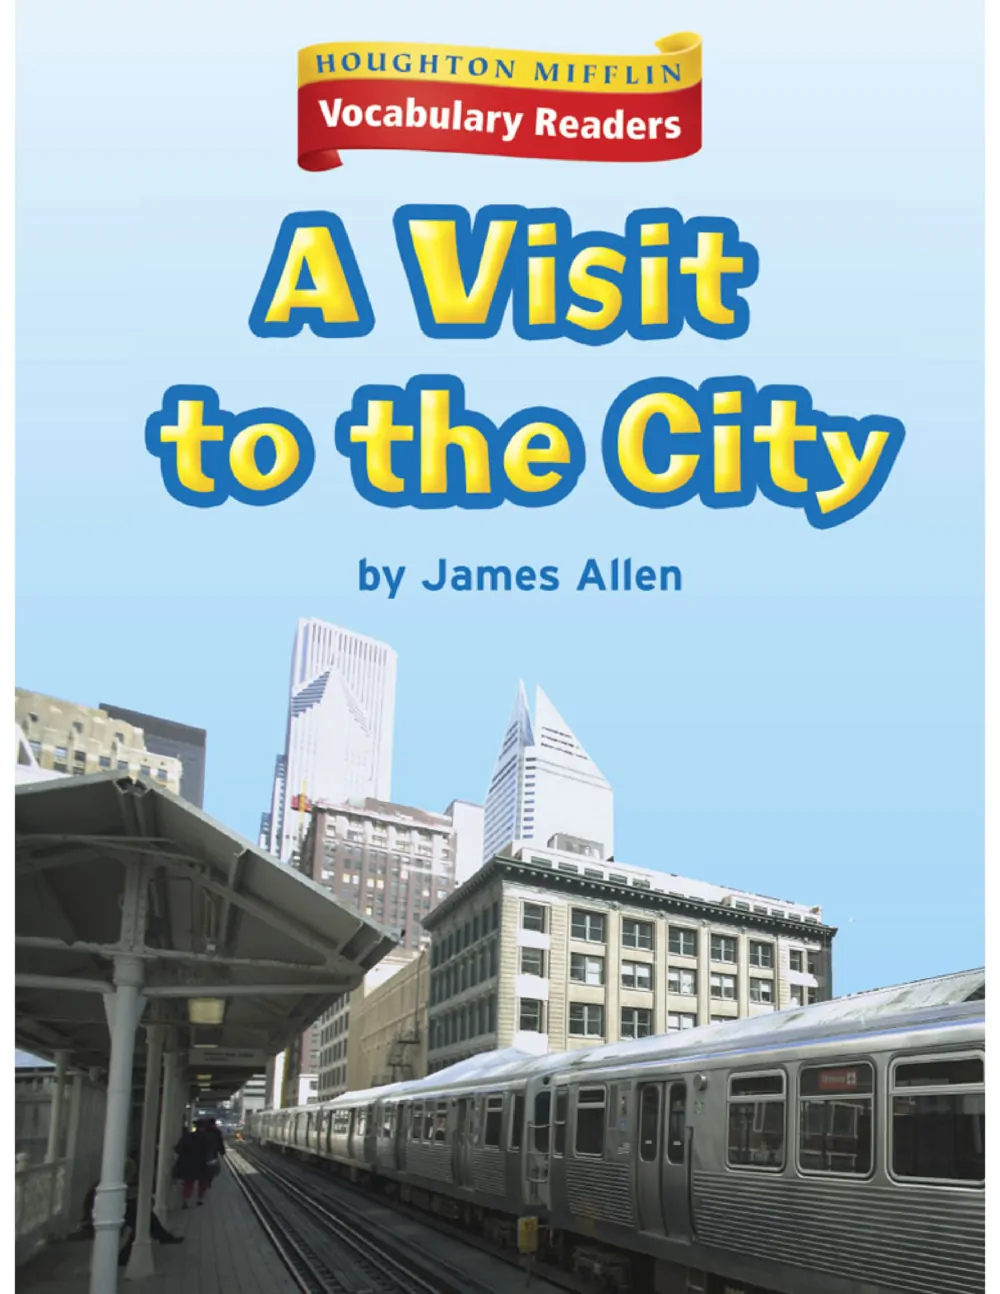 Vocabulary Readers: A Visit to the City